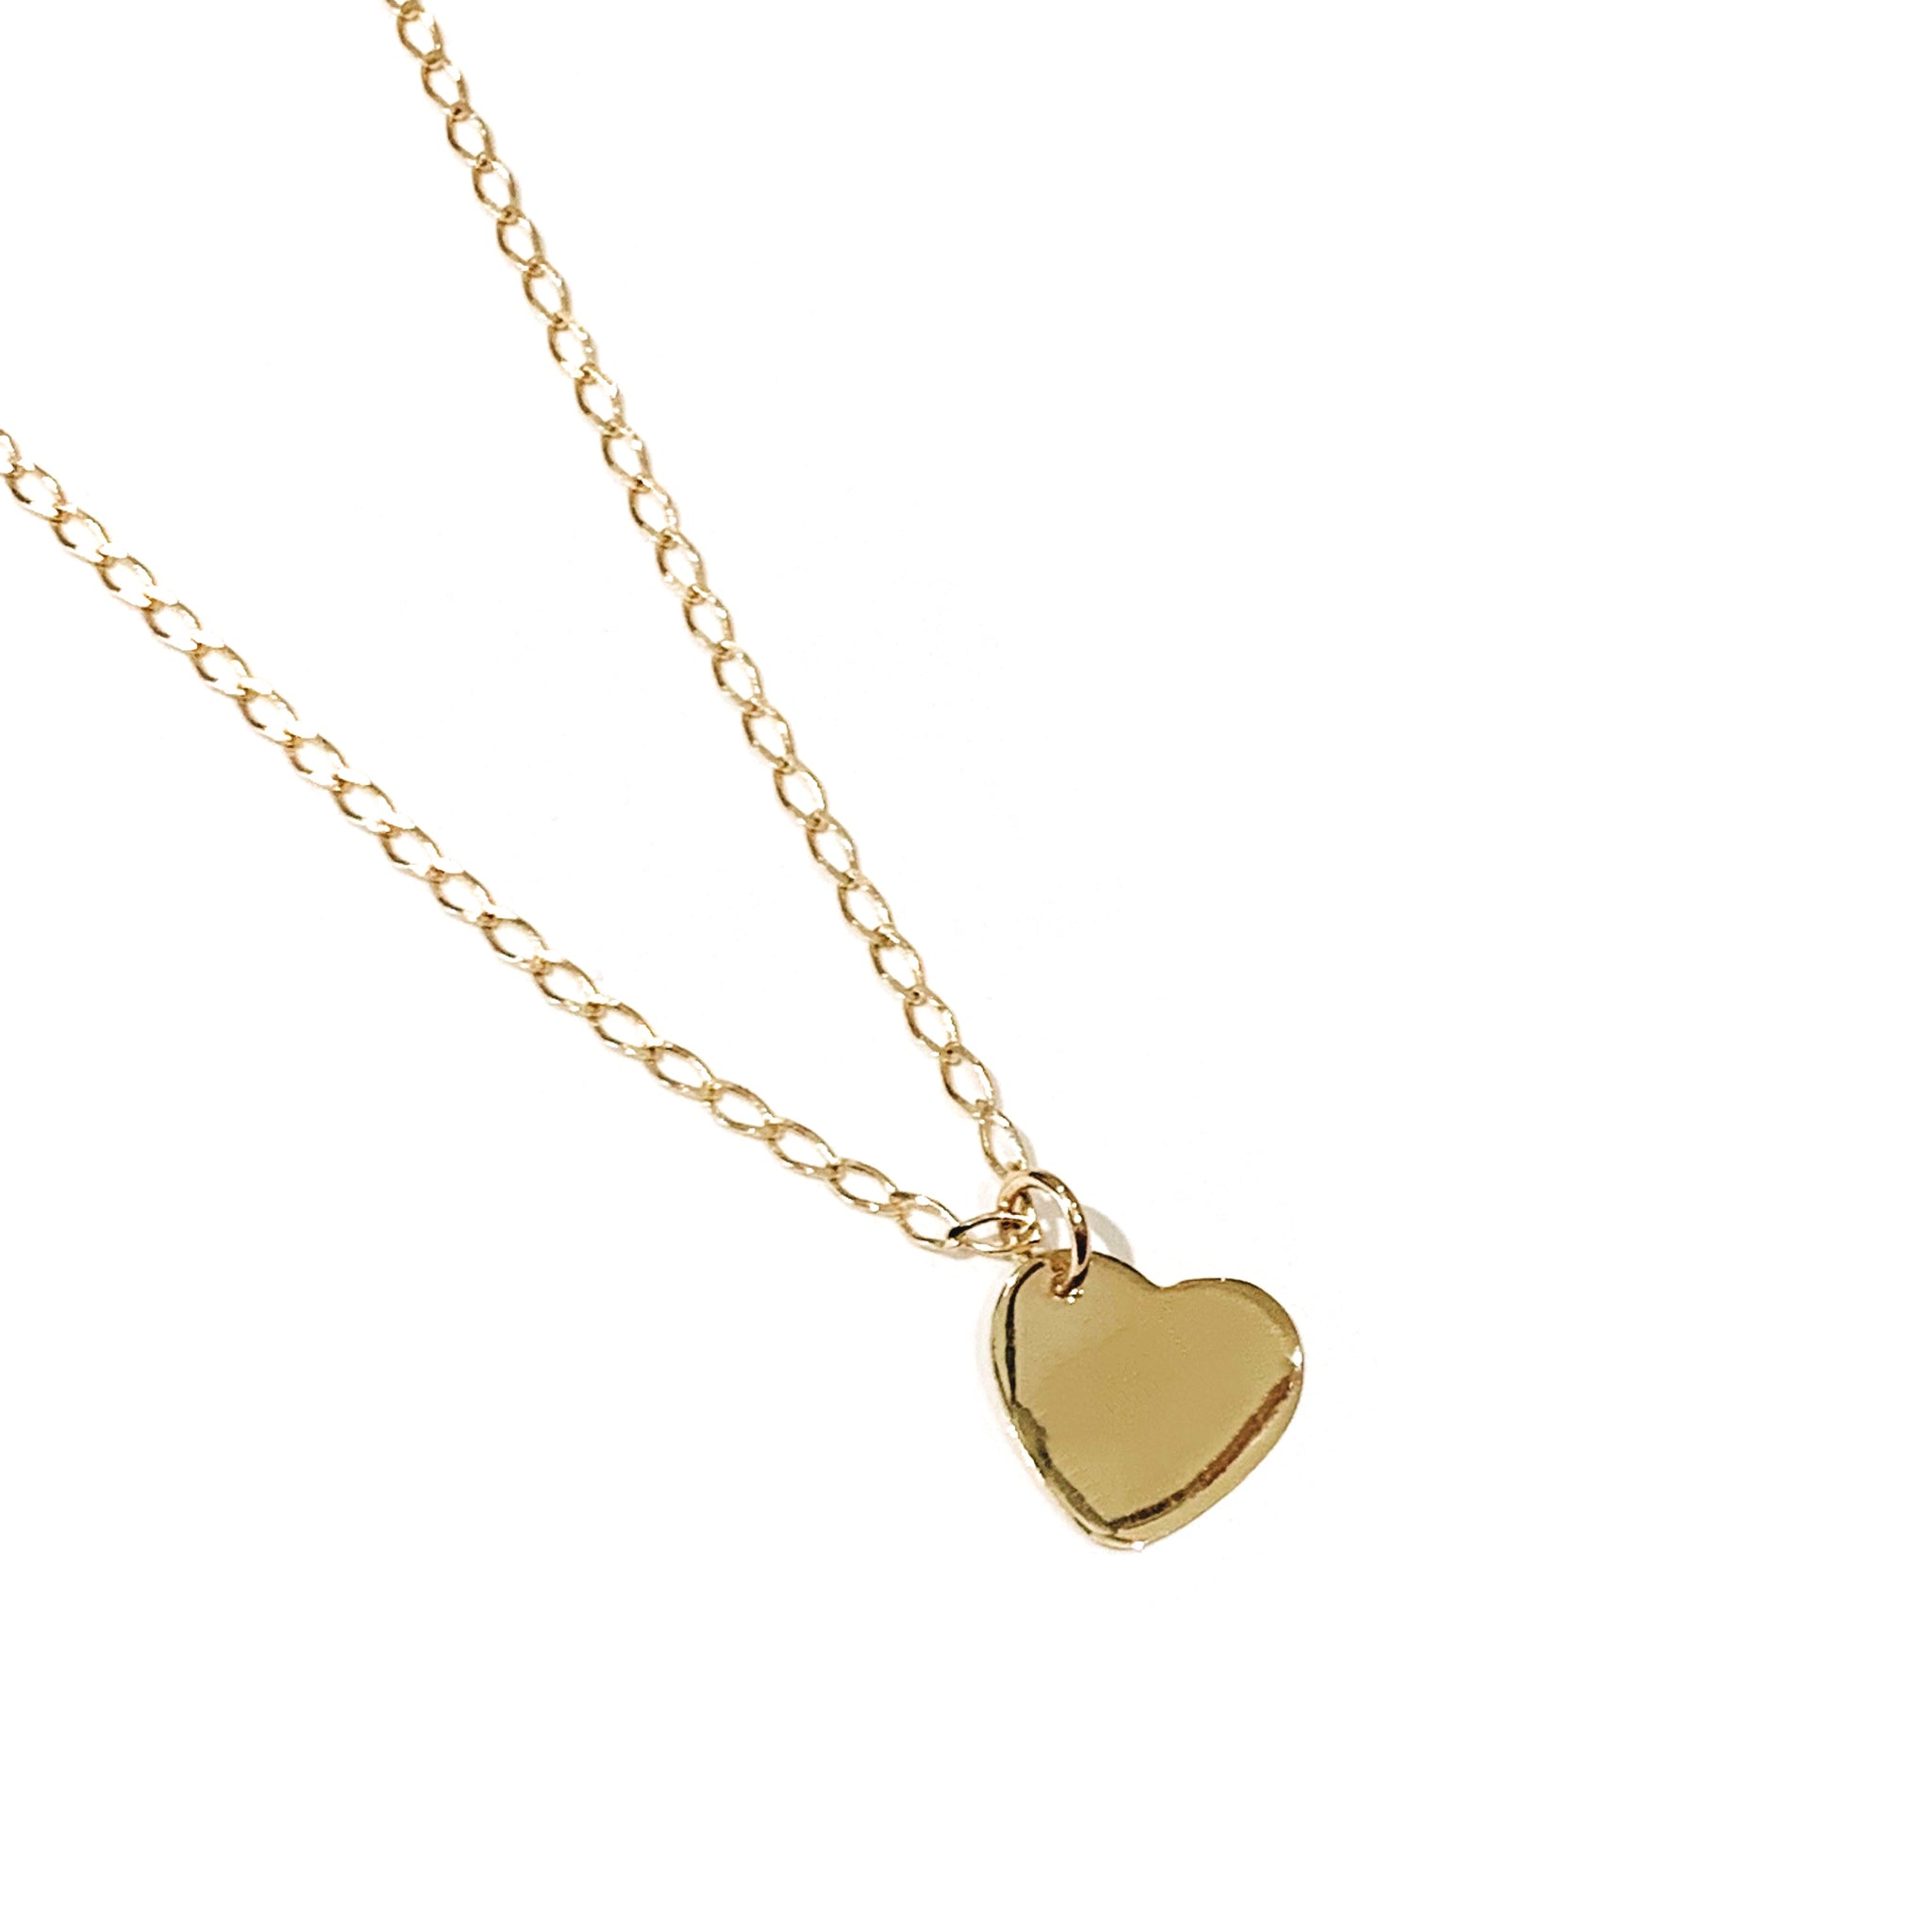 The Tender Heart Necklace in 10K Gold